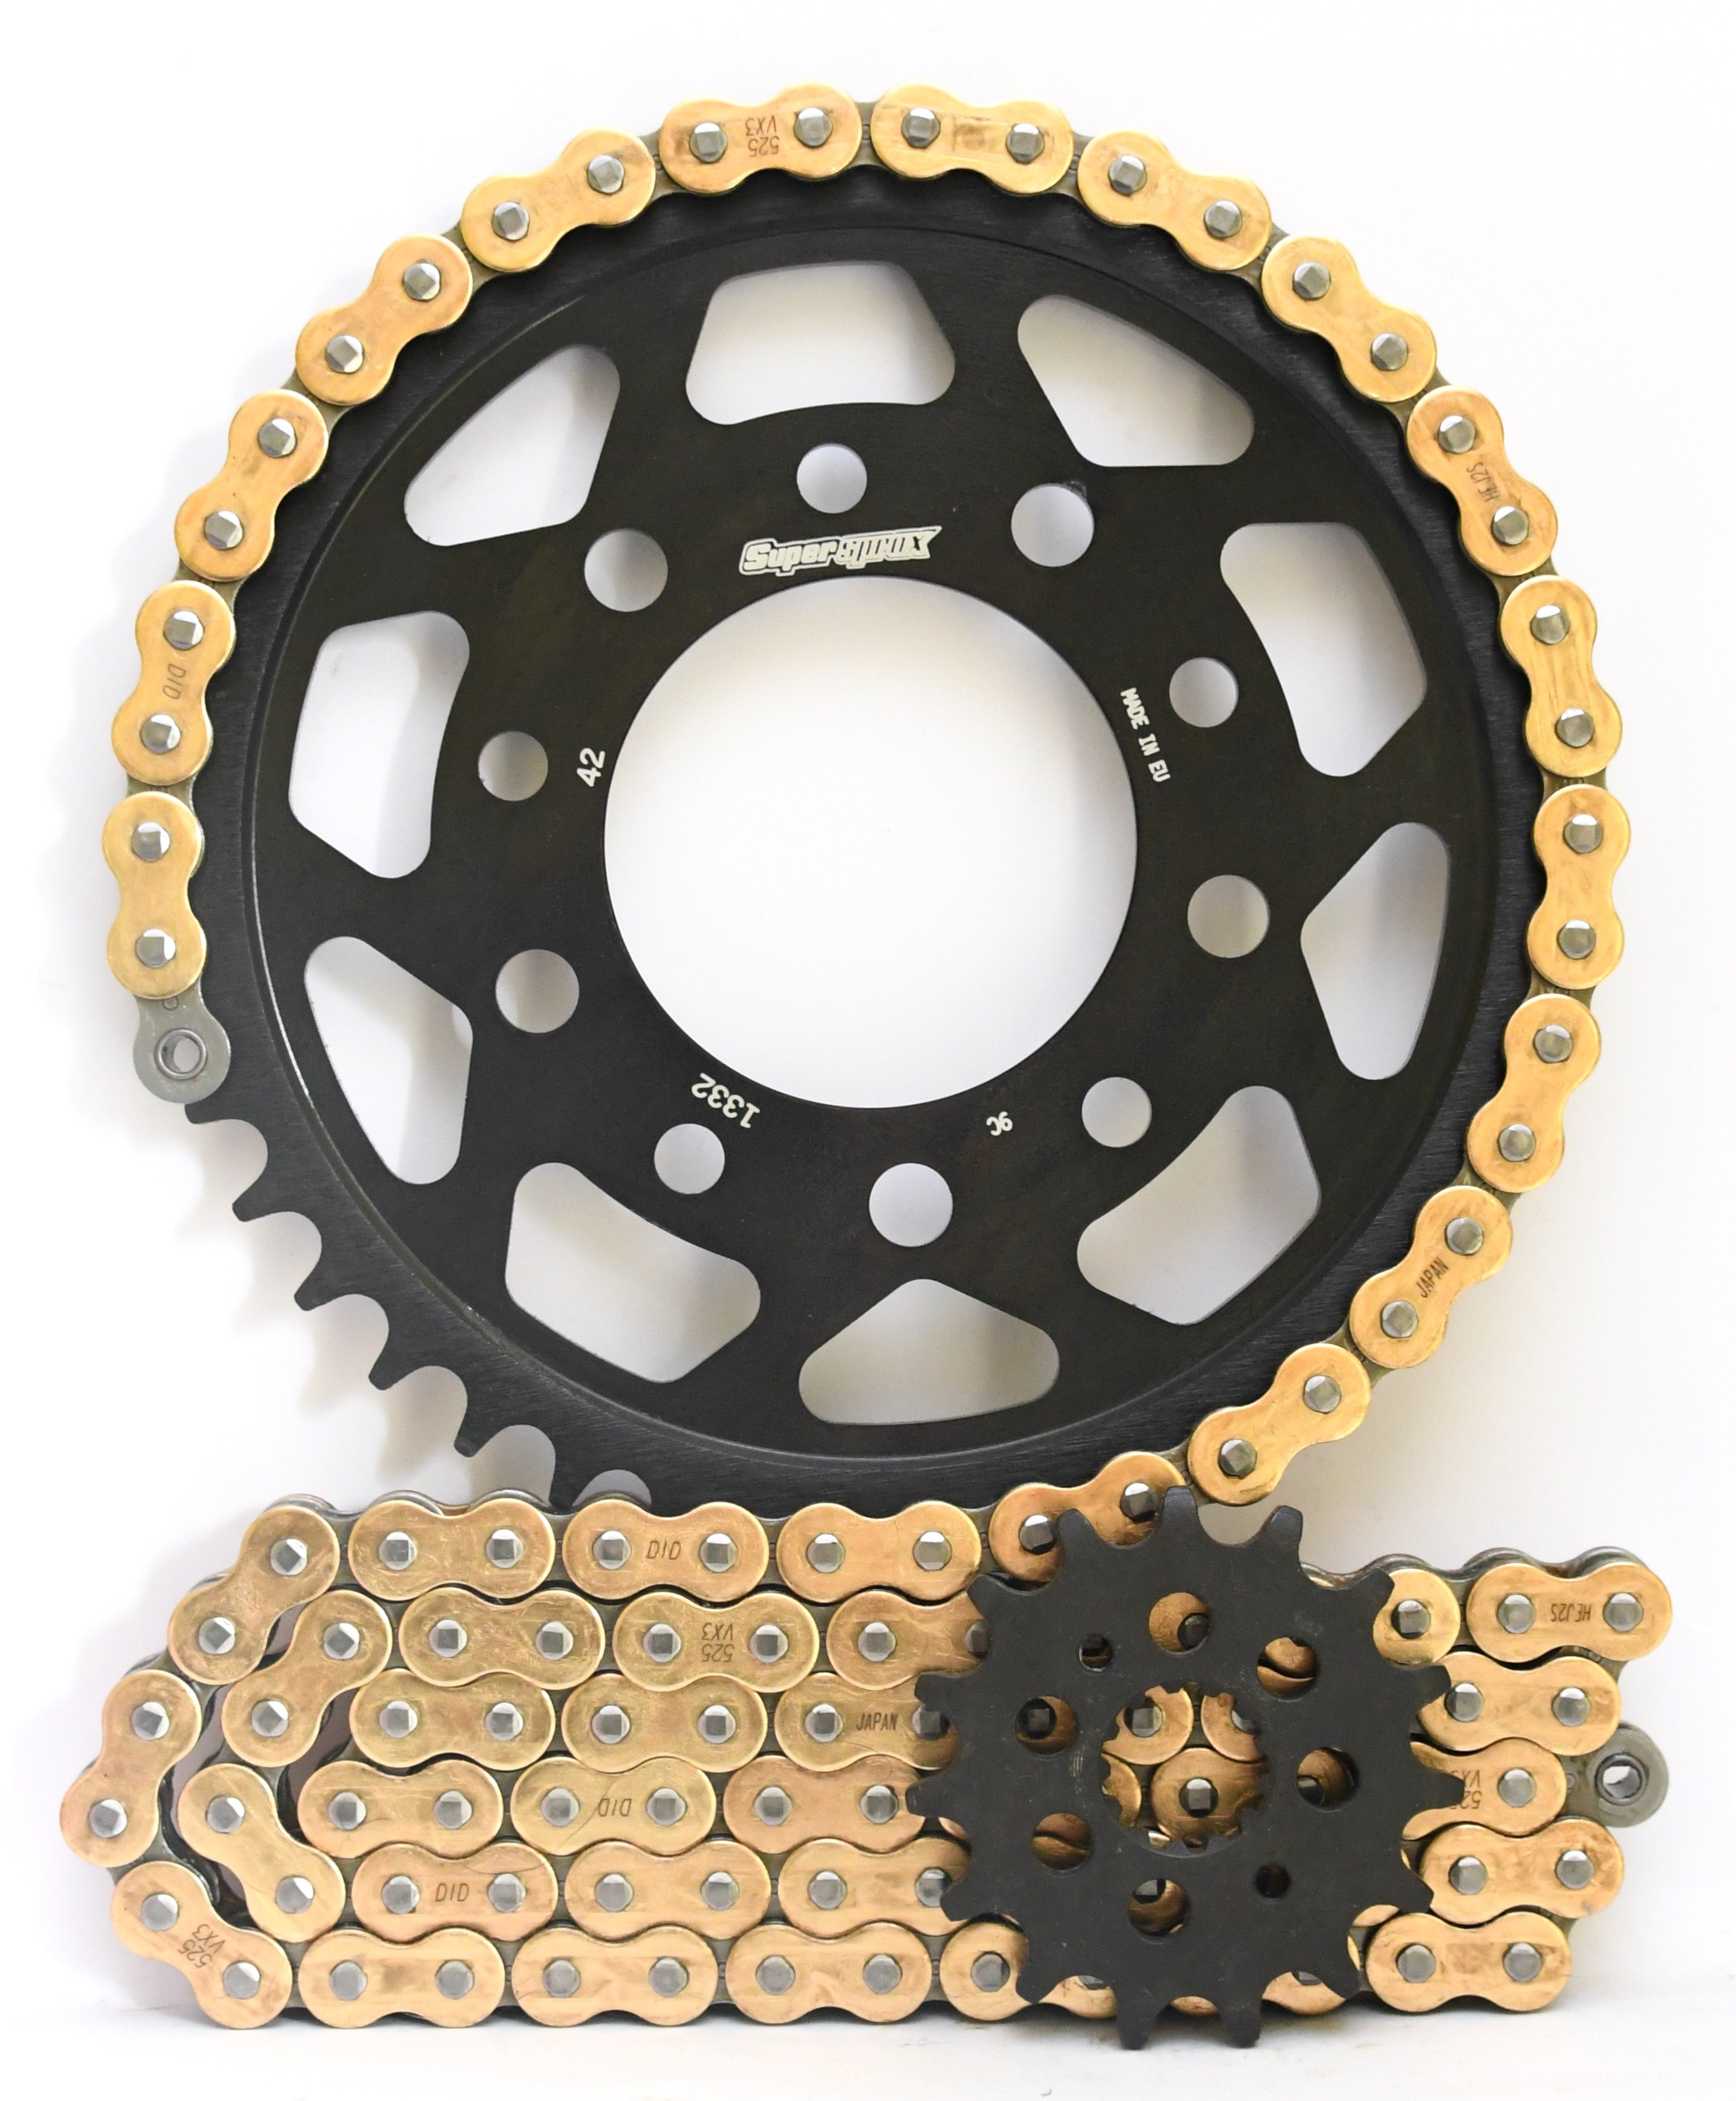 Supersprox Steel Edge Chain & Sprocket Kit for Triumph America 865 2007-2014 - Standard Gearing